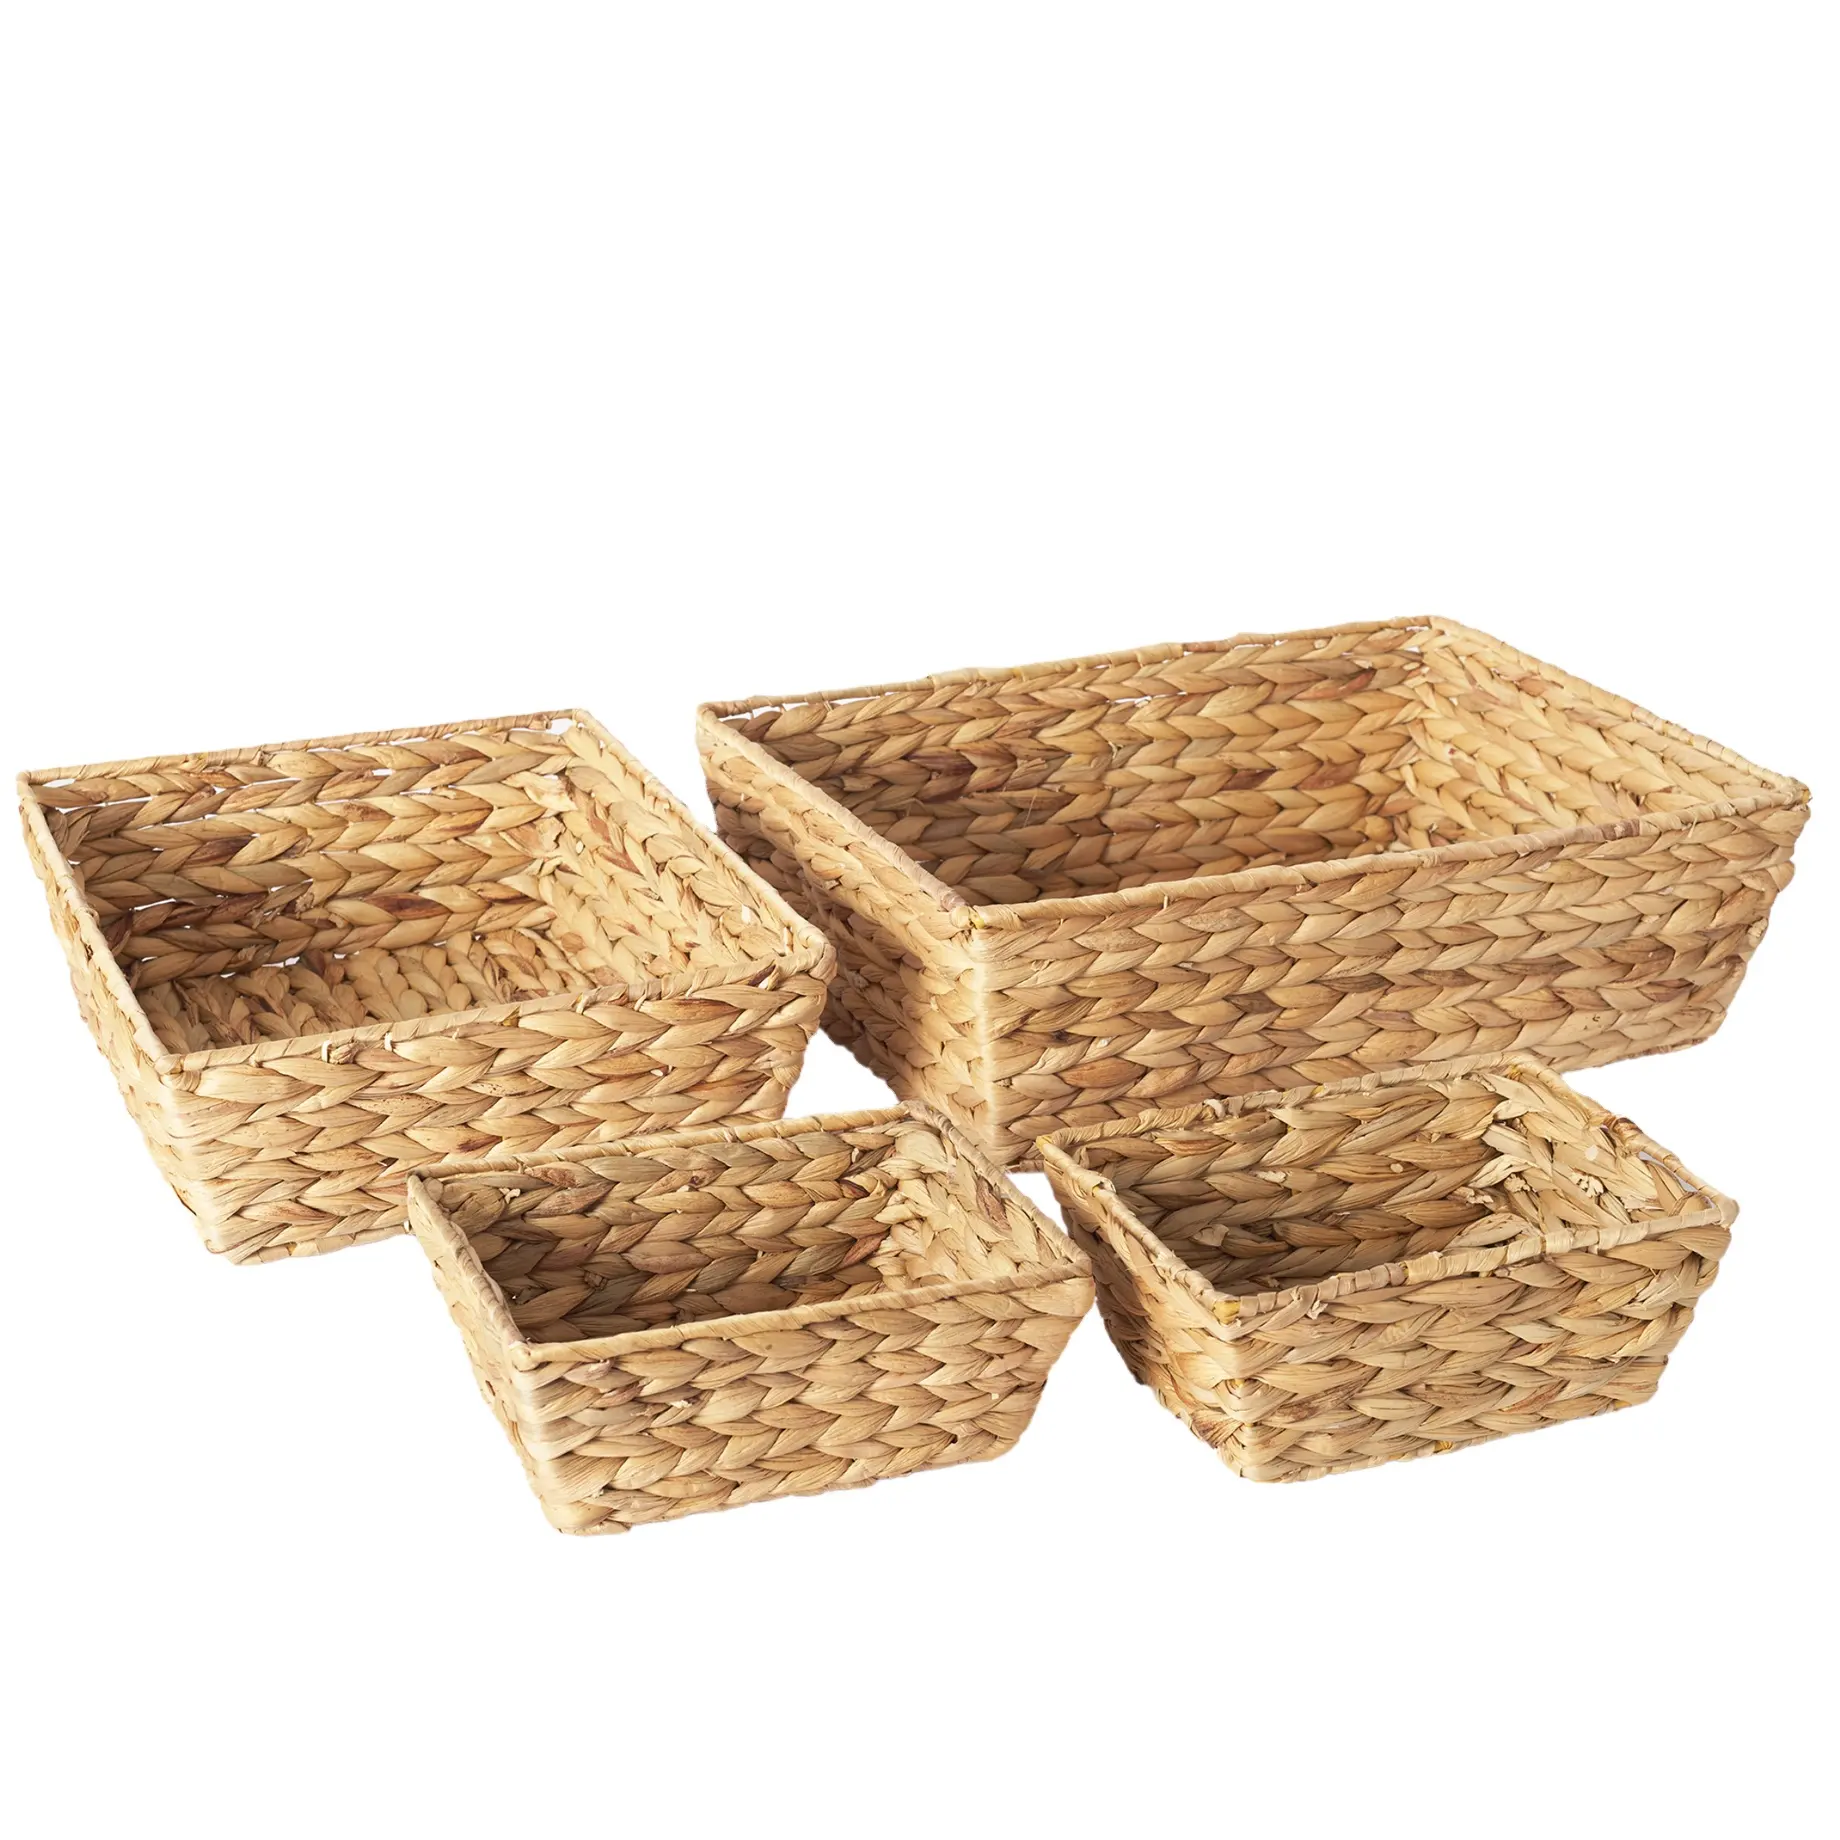 Hand Made Woven Water Hyacinth Basket Set of 4 Storage Baskets for Toys, Towels, Blankets, Books Large Wicker Storage Basket